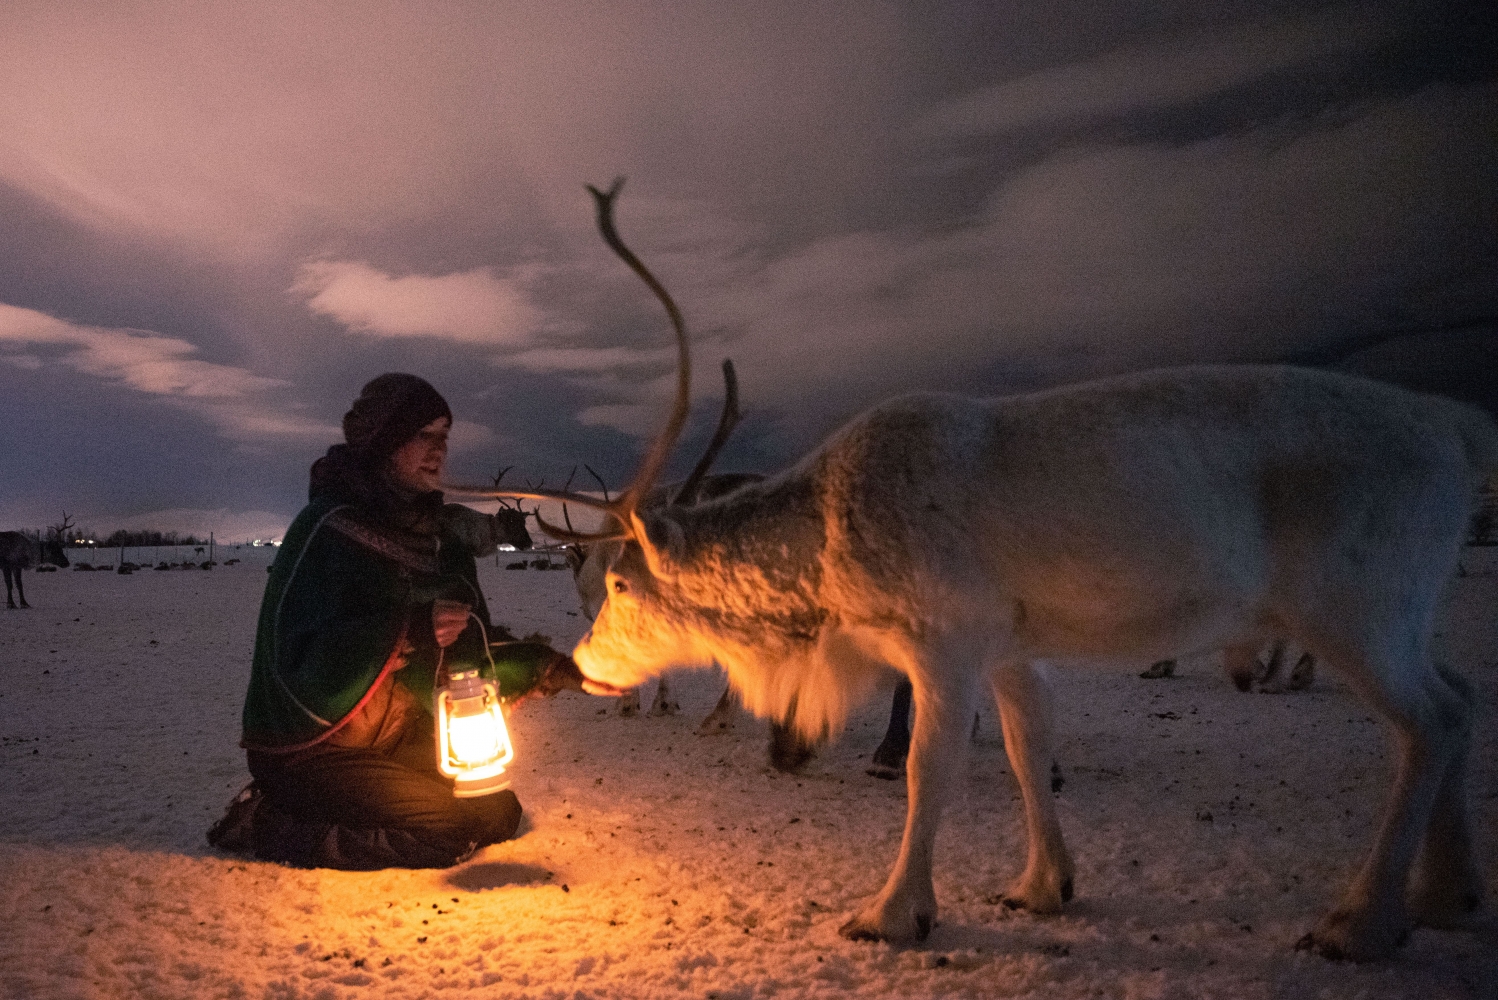 Night reindeer sledding with dinner and chance of Northern Lights